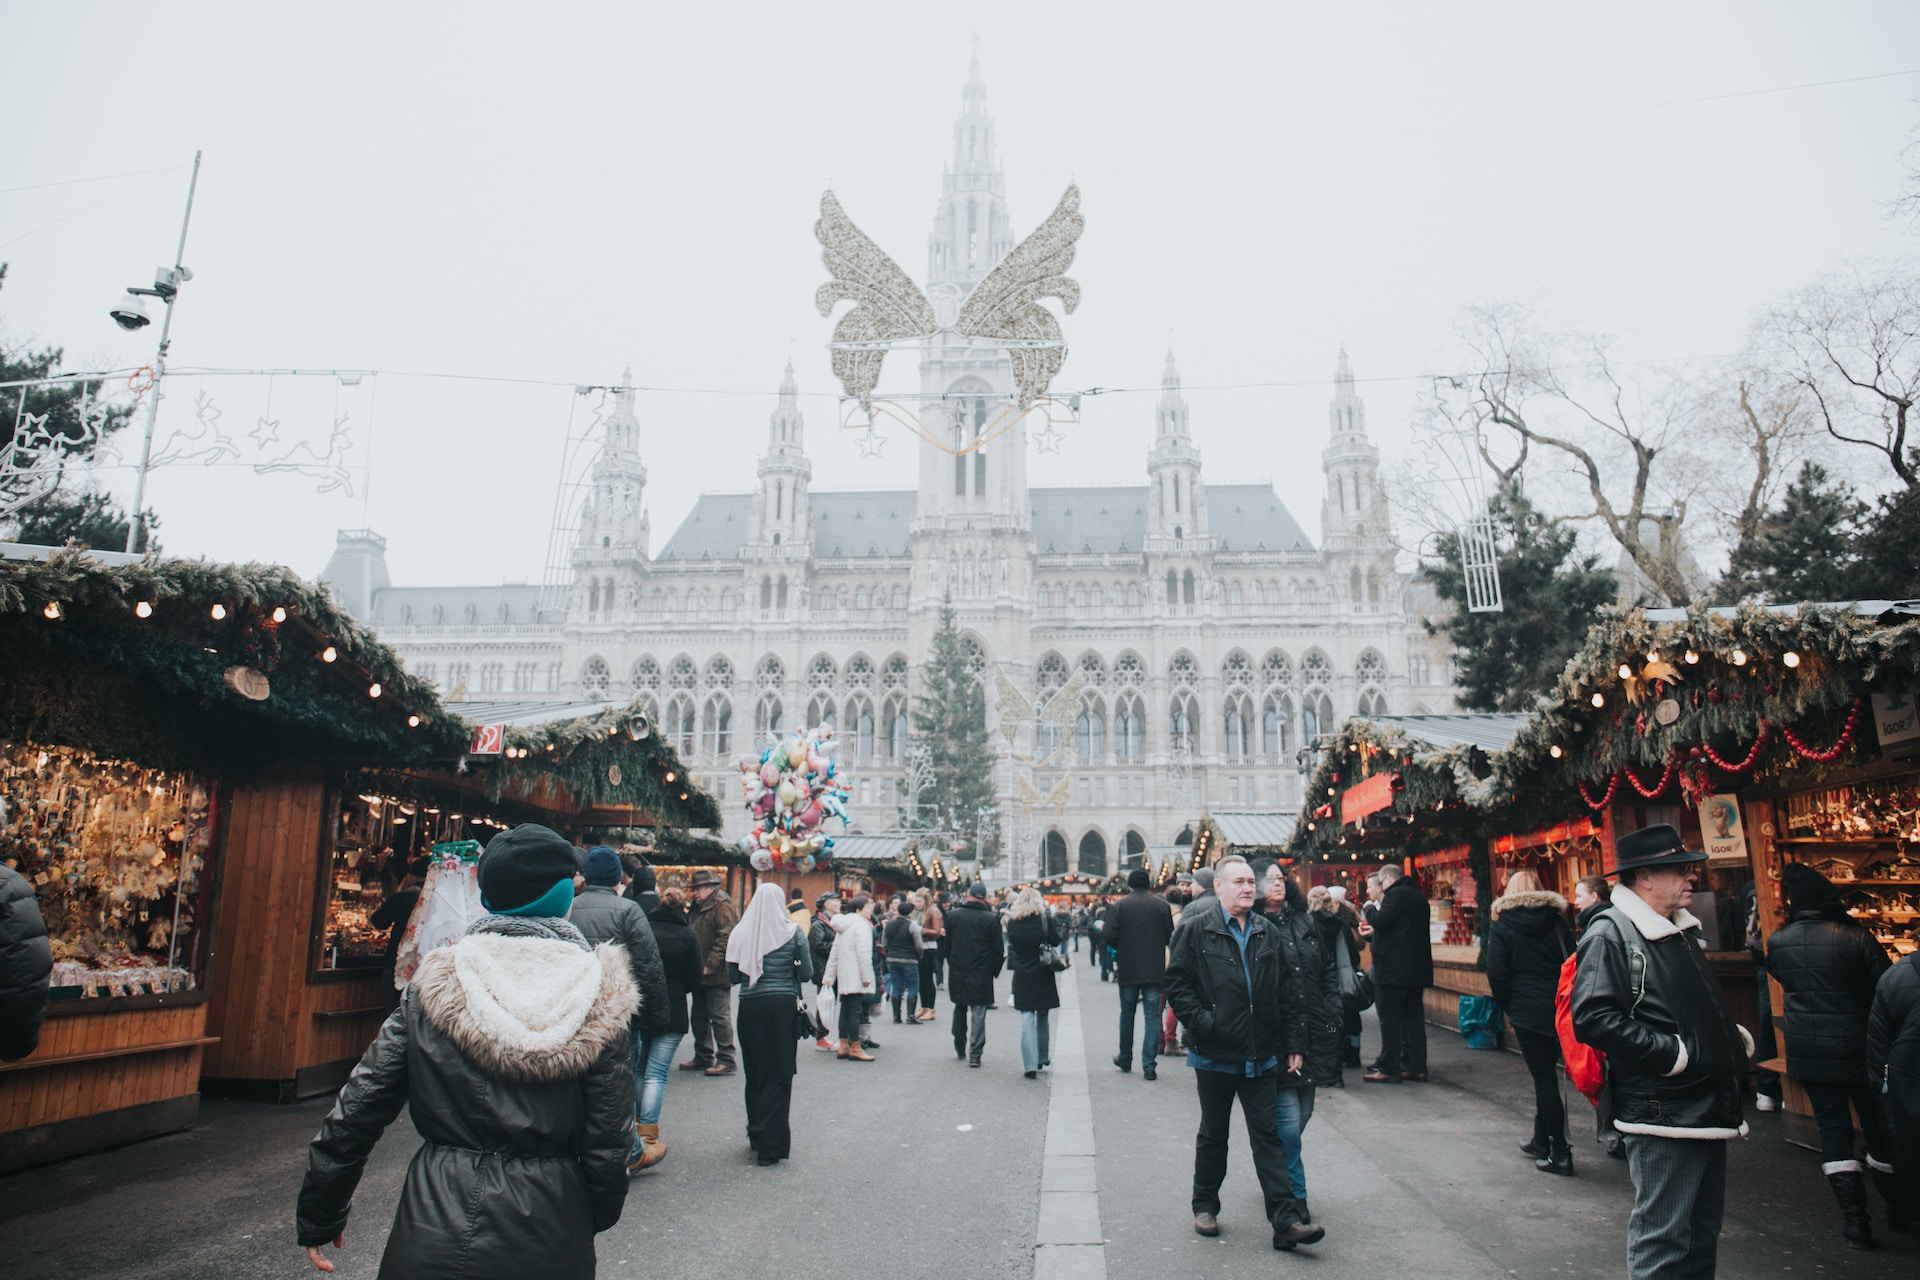 The Christmas market in Vienna.